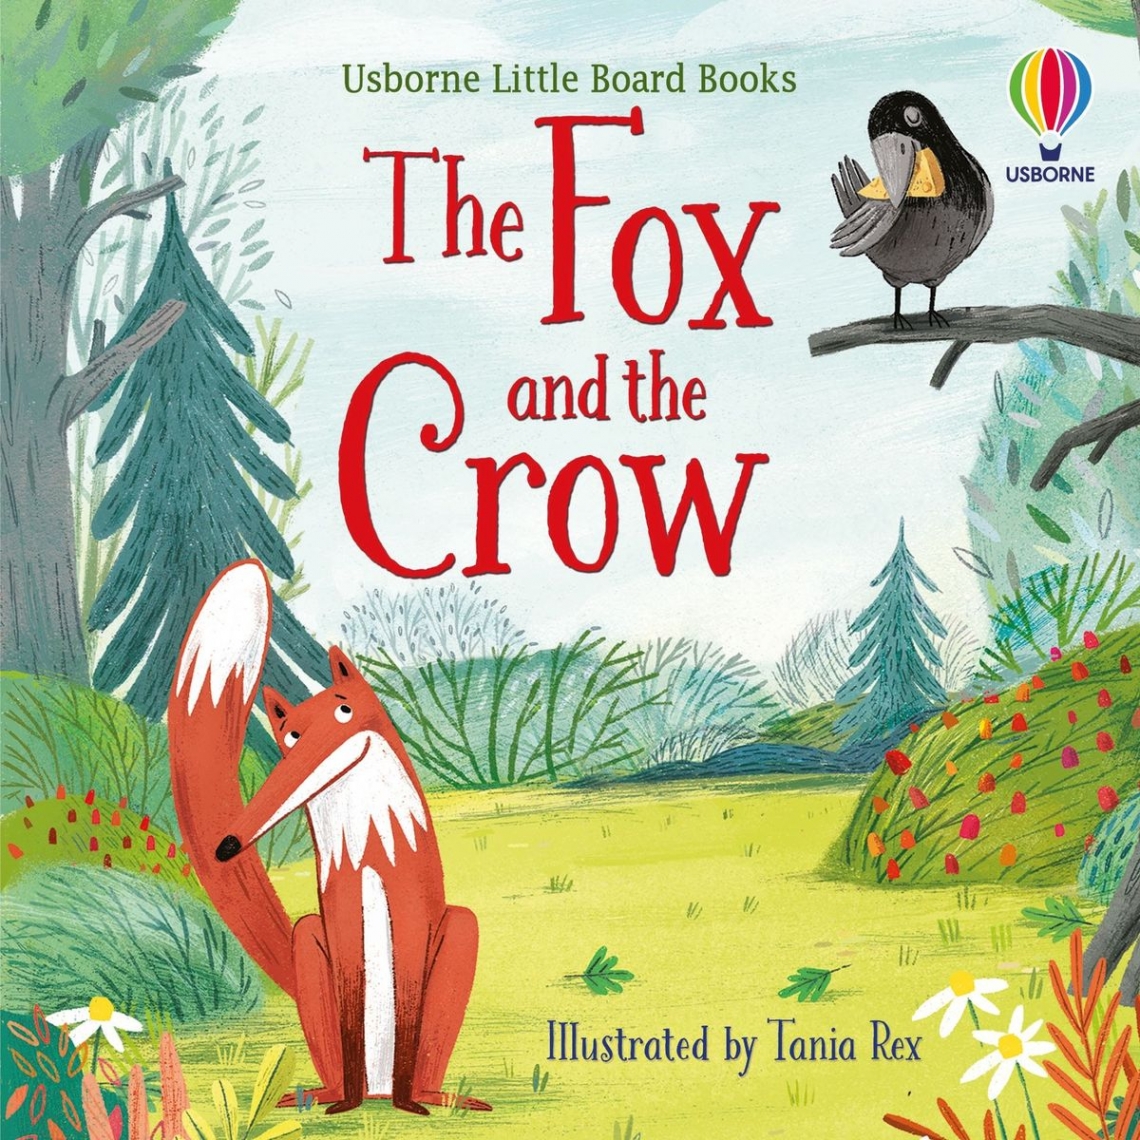 Lesley Sims Usborne Little Board Books The Fox and the Crow 